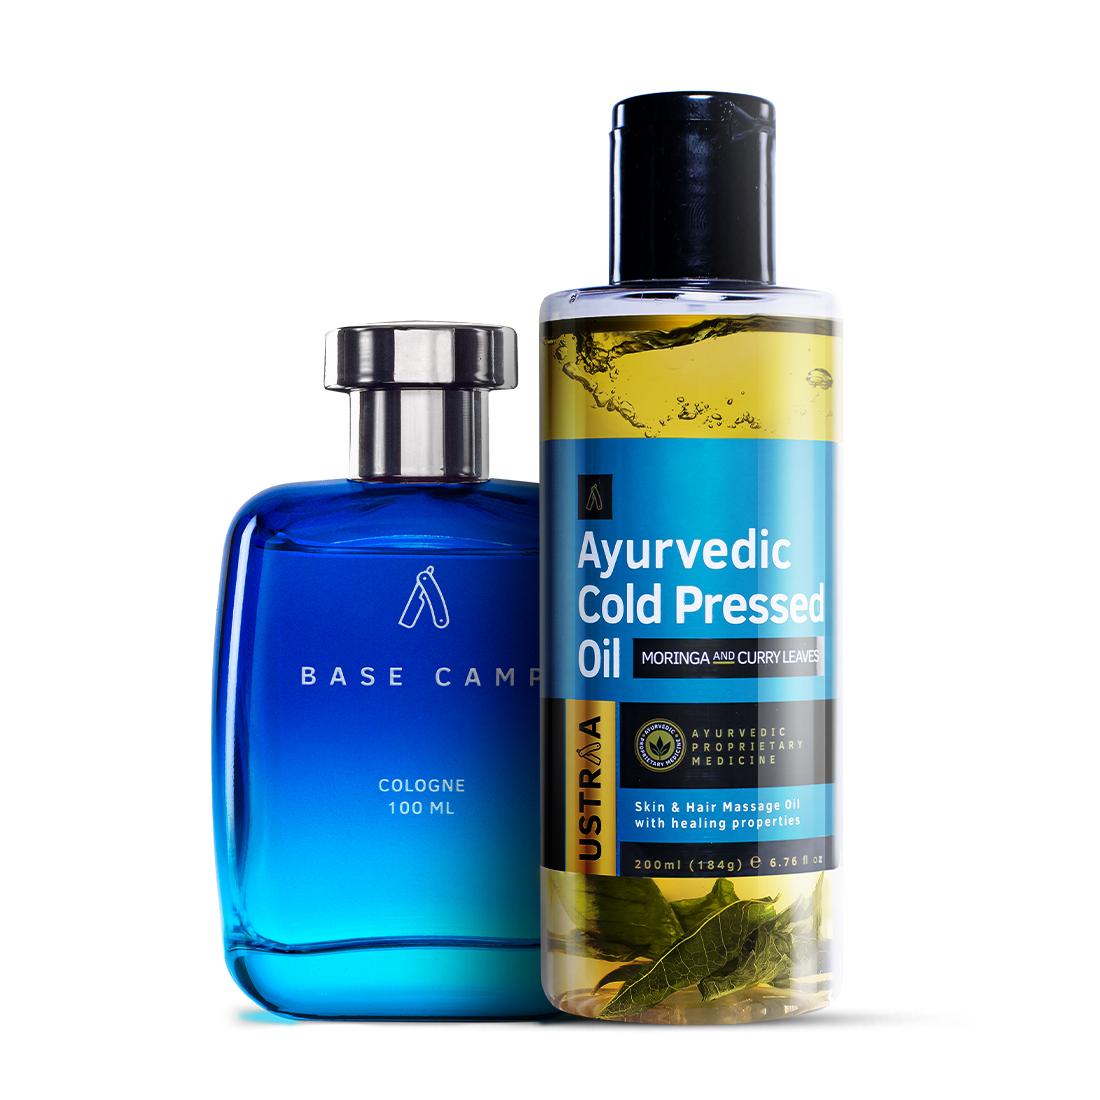 Ayurvedic Cold Pressed Oil & Cologne Base Camp Combo